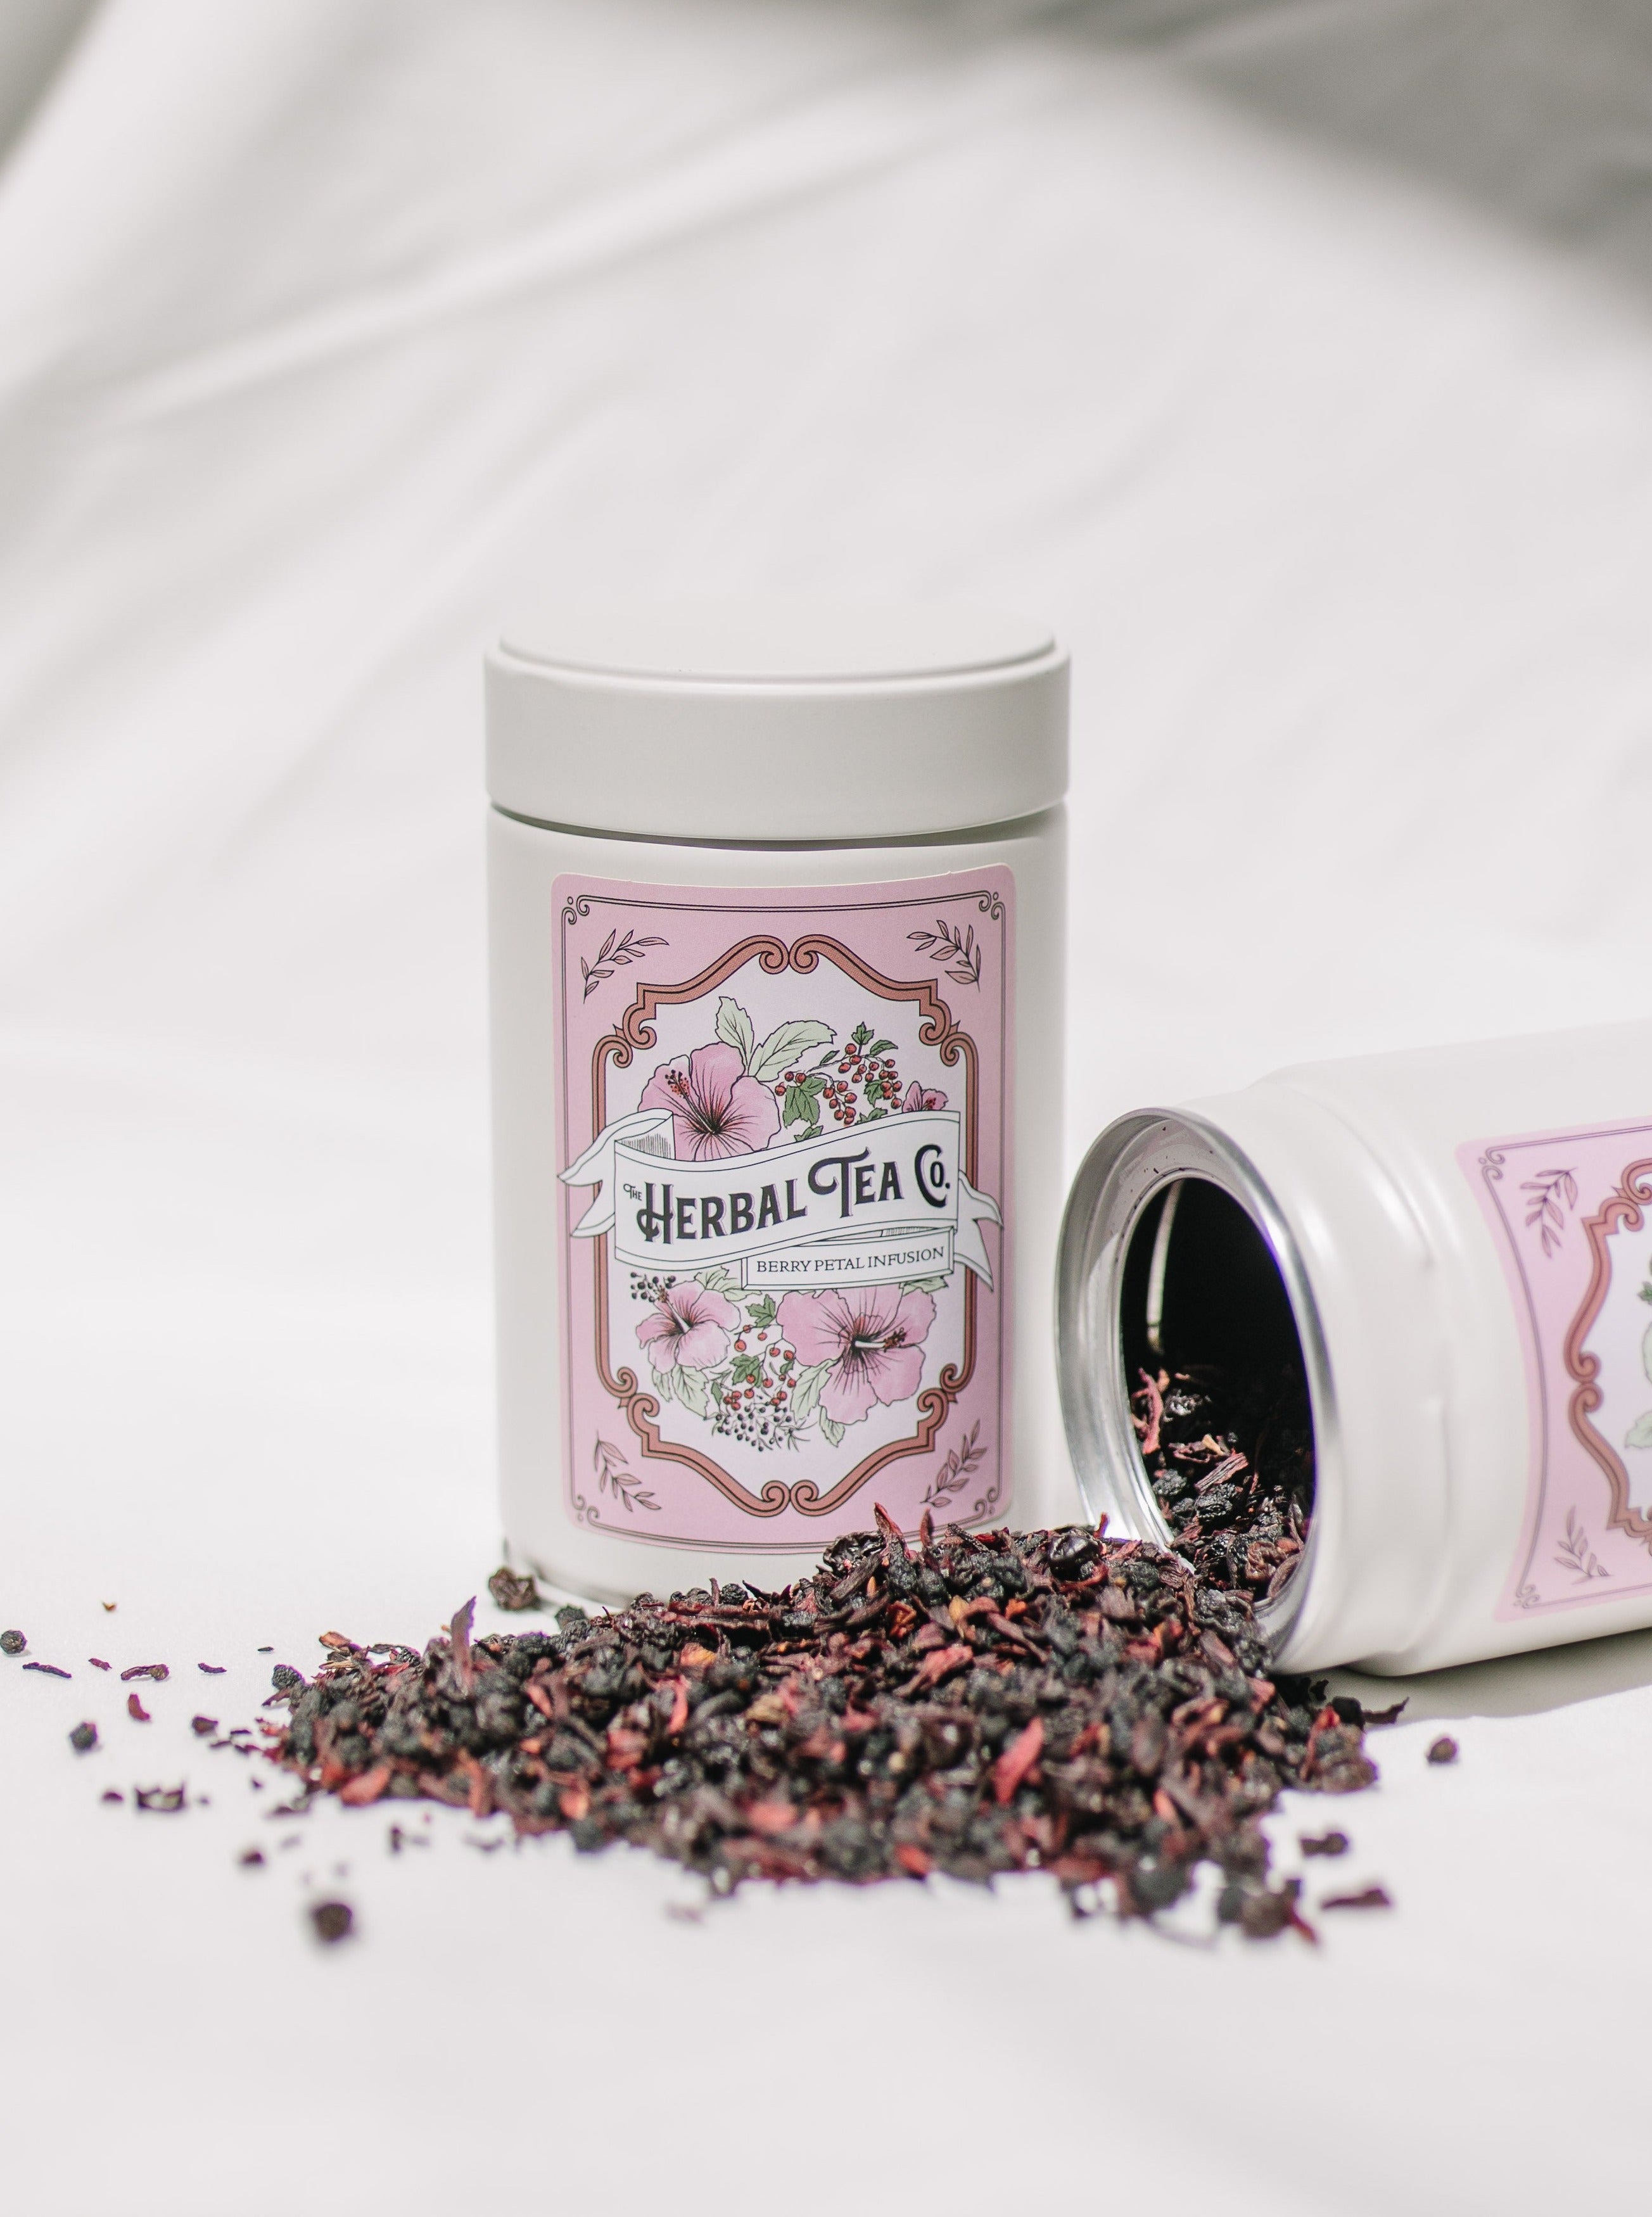 Berry Petal Infusion